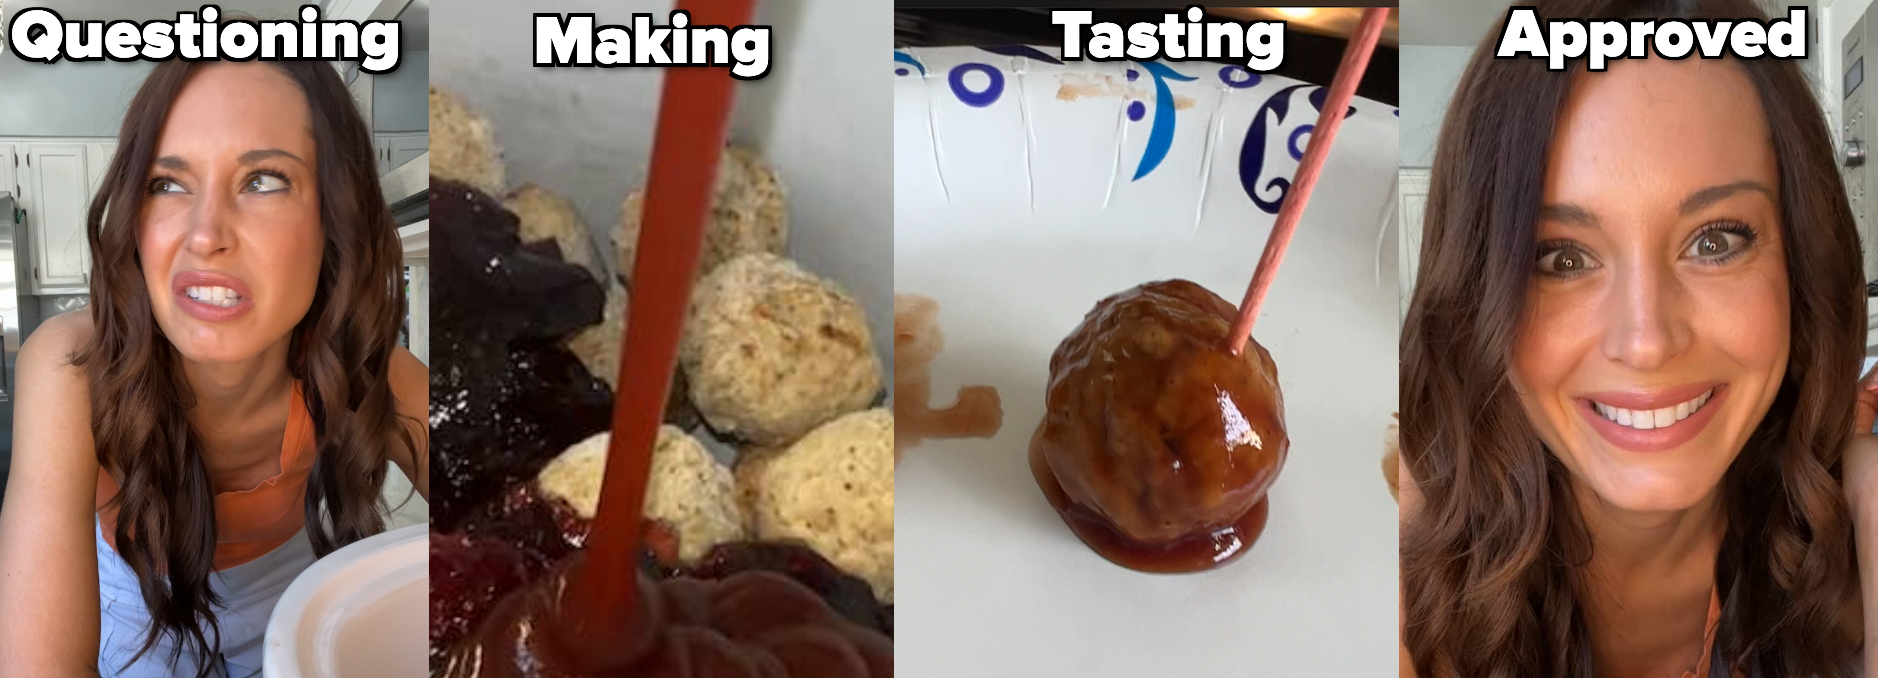 the process from questioning to making to tasting and then approving the meal